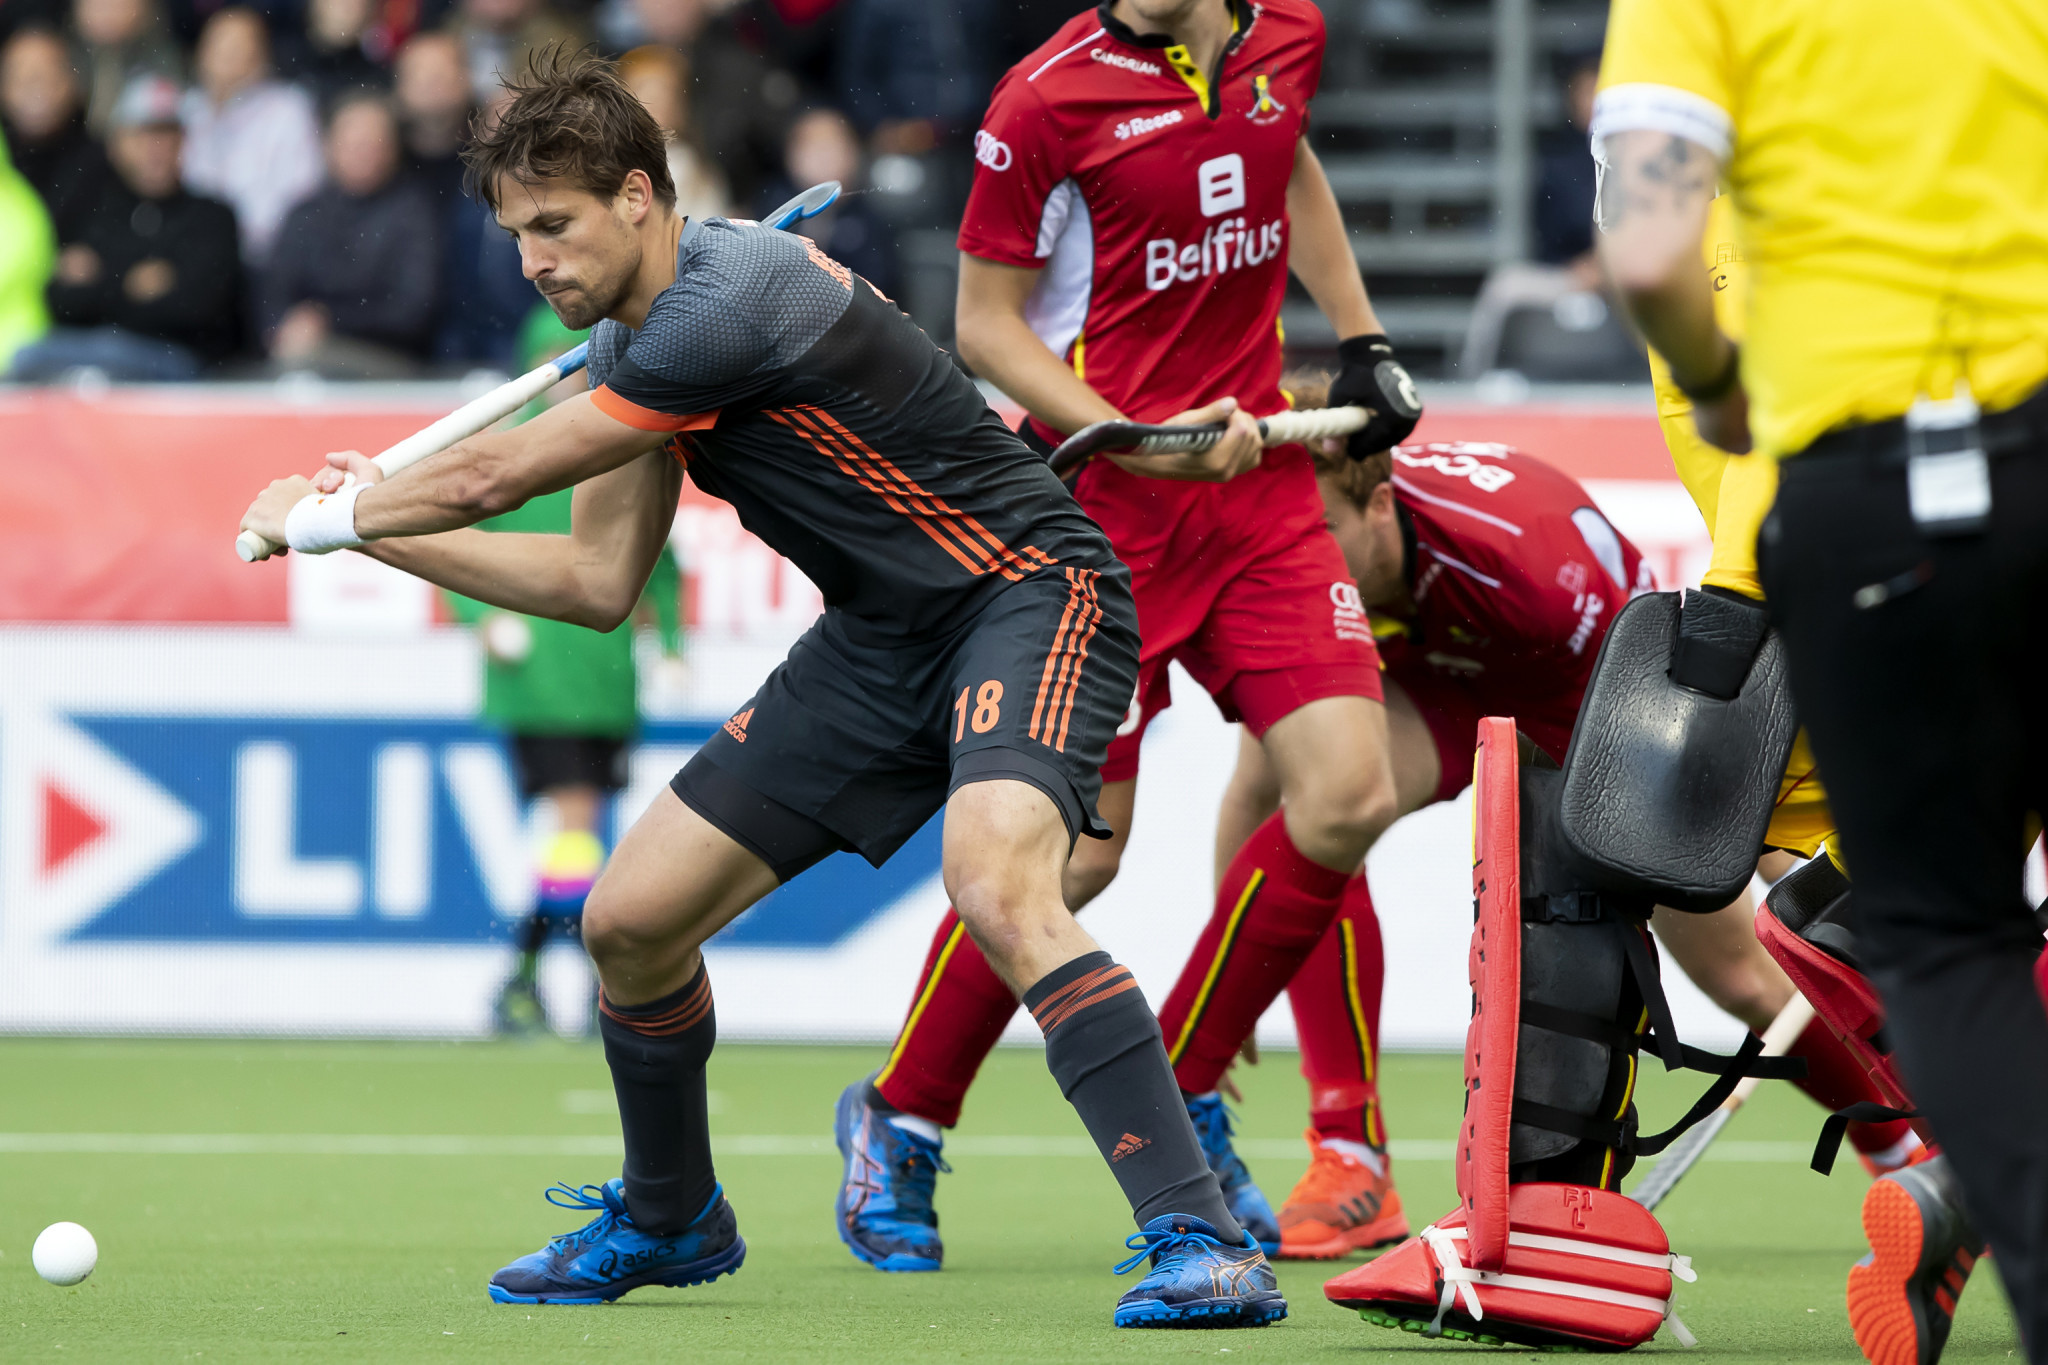 Netherlands win both matches in FIH Pro League double header with Belgium